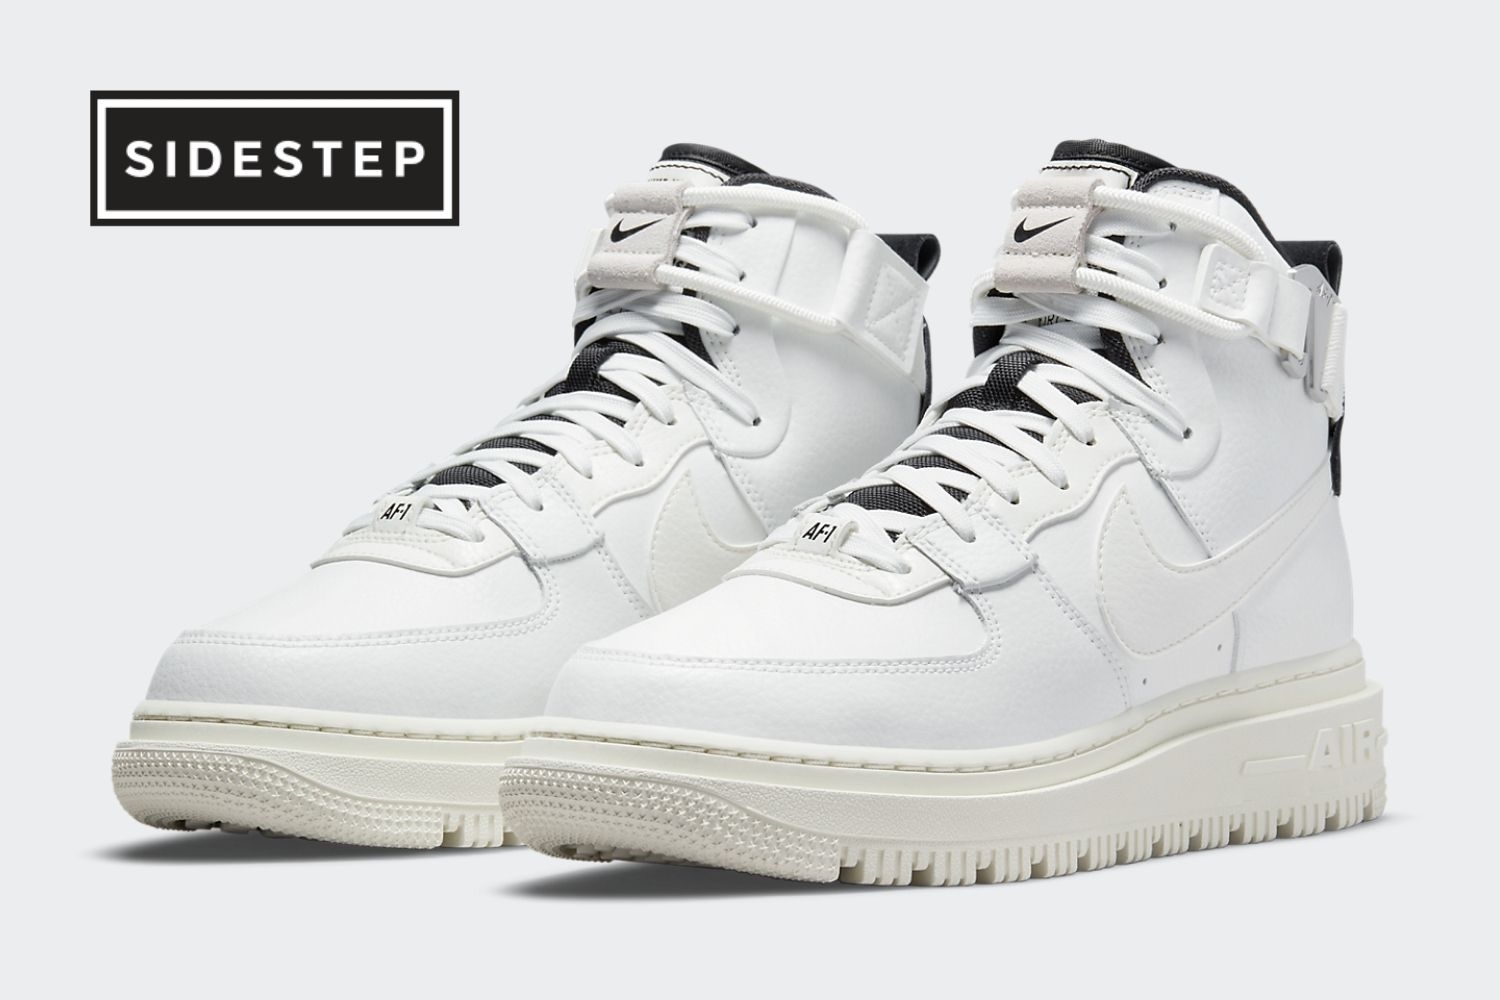 Nike Air Force 1 High Utility 2.0 restocked at Sidestep